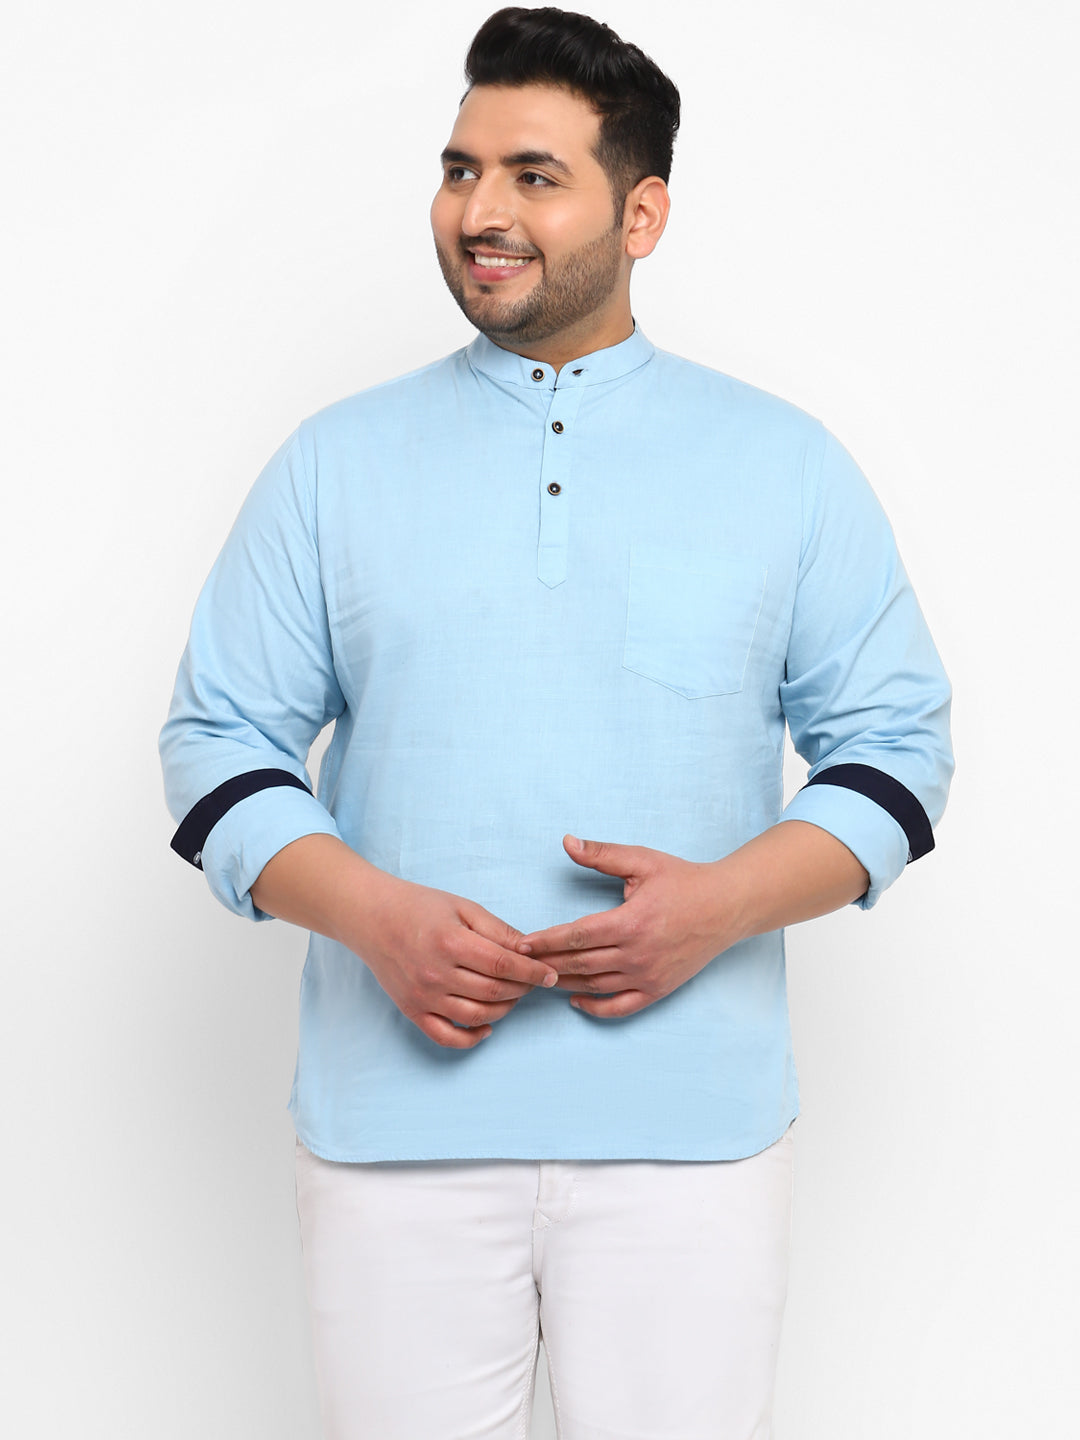 Plus Men's Sky Blue Cotton Full Sleeve Regular Fit Casual Solid Shirt